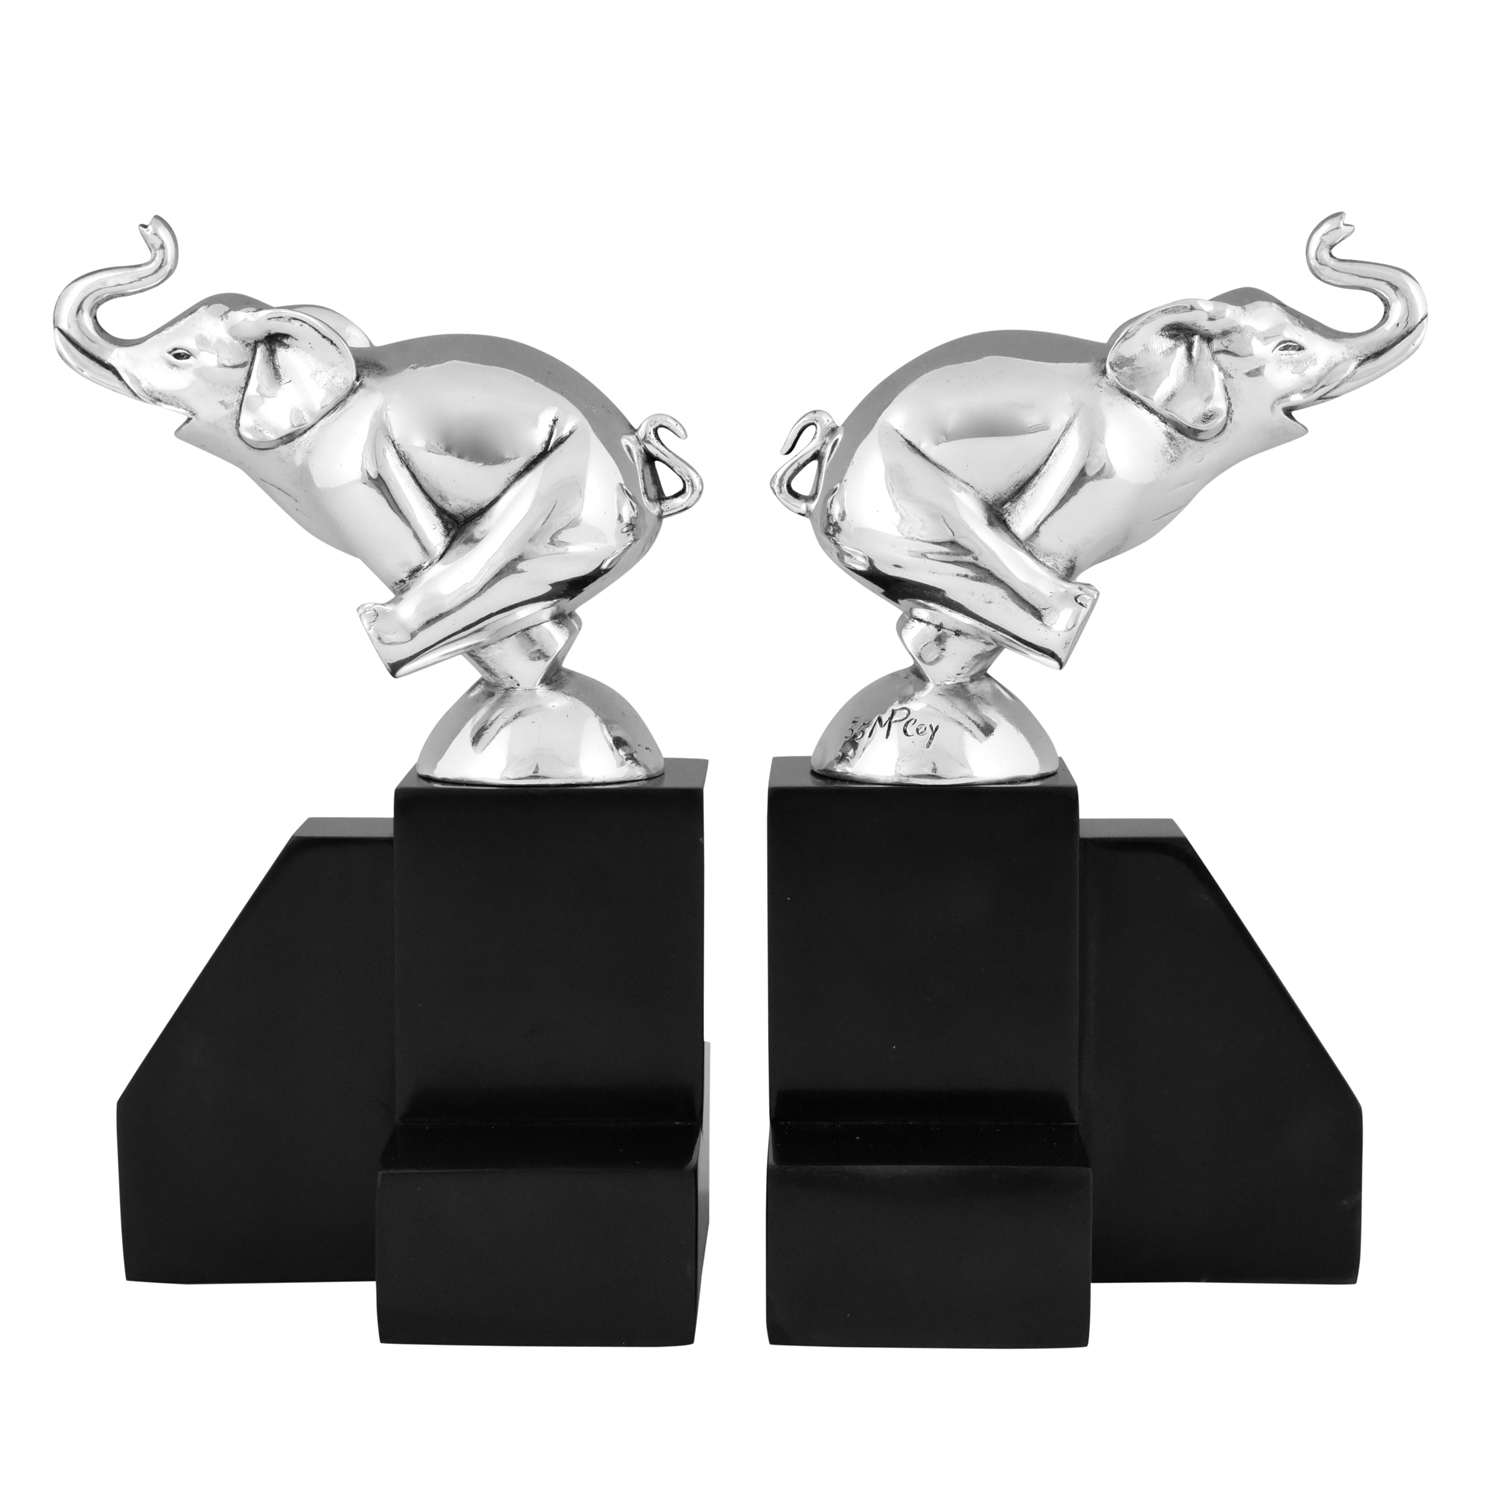 Art Deco silvered bronze elephant bookends